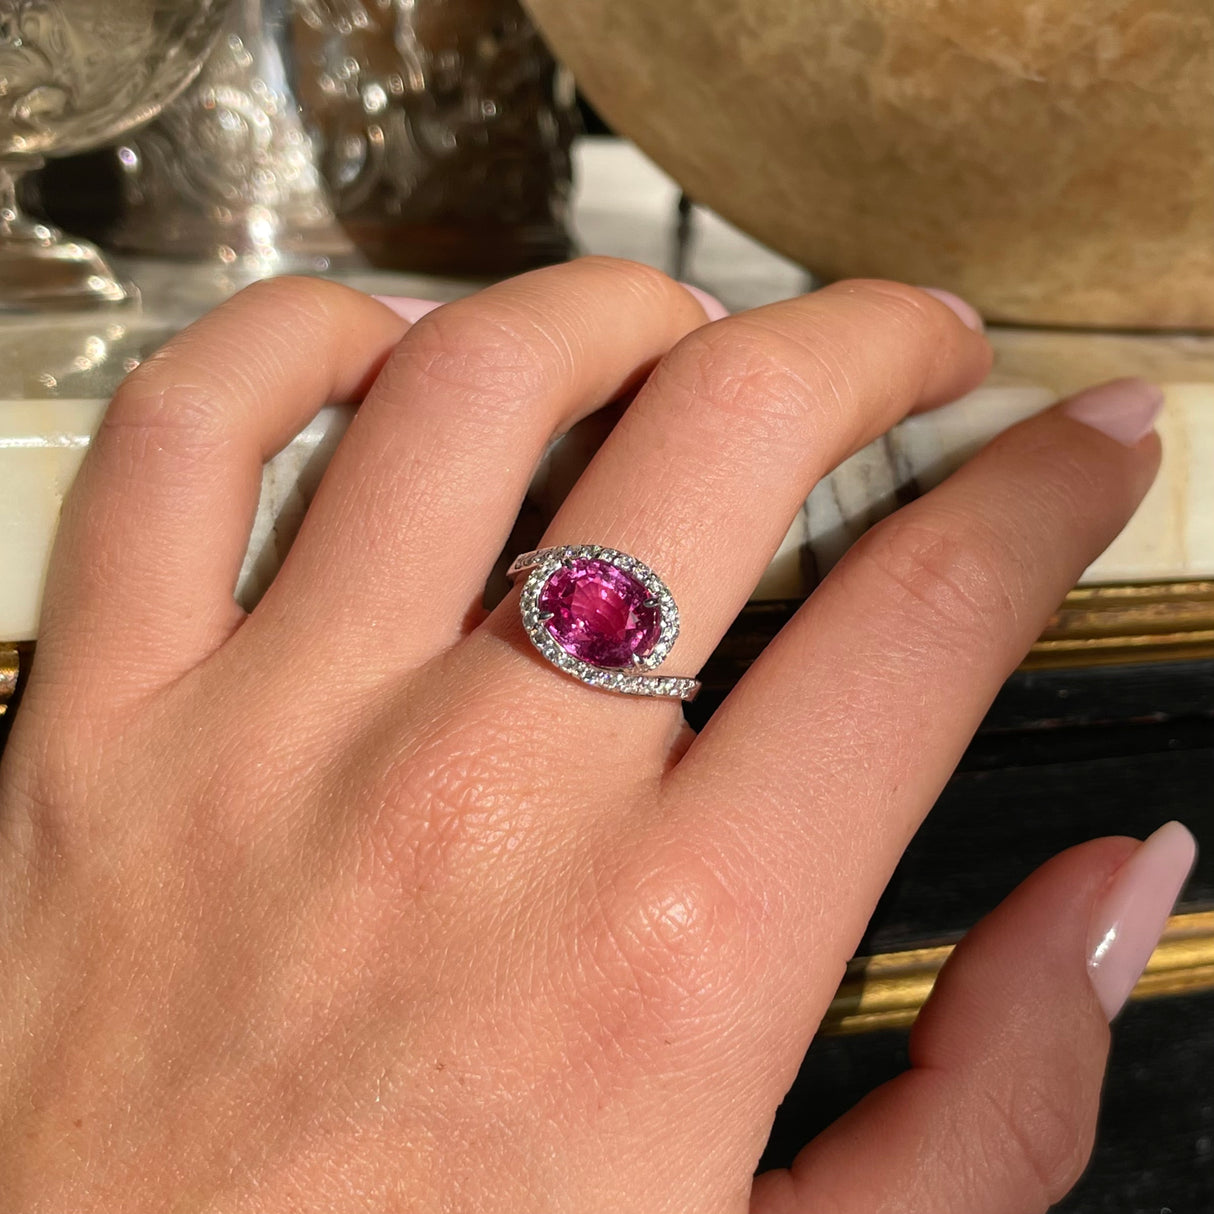 Pink sapphire and diamond engagement ring, worn on hand.